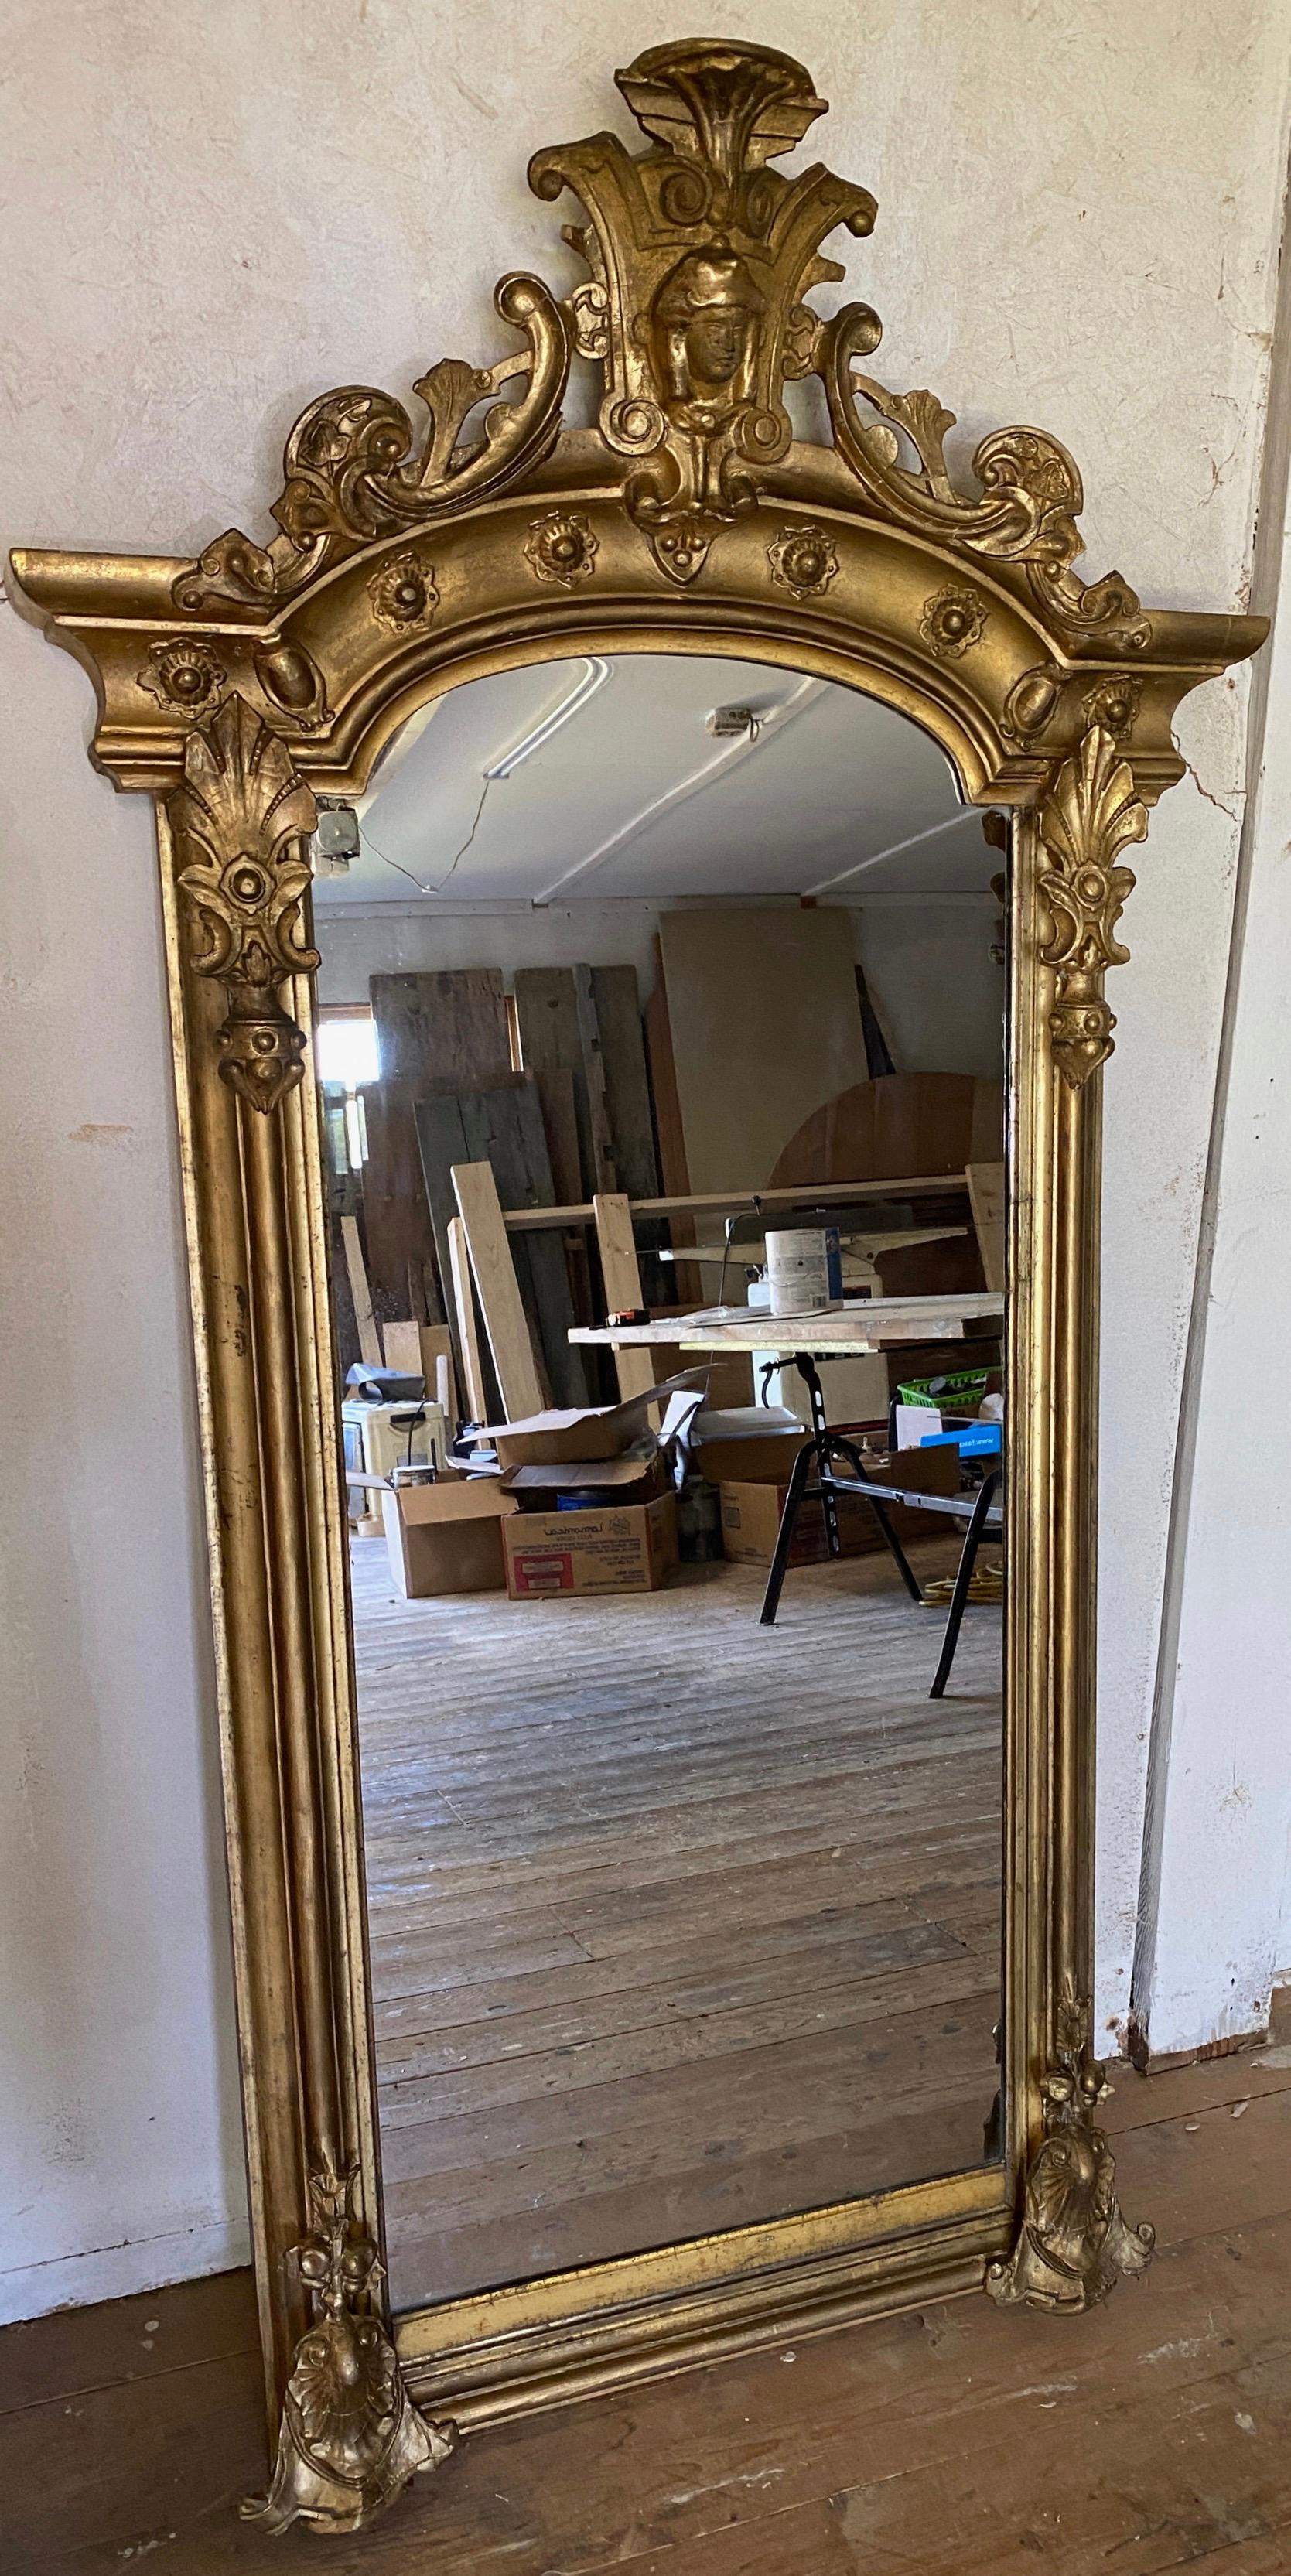 A rare large American baroque revival gilt-wood and composition full length pier mirror with a flamboyant crest that tops the elaborately decorated frame.  This mirror will make a statement in any space, place it in the entry hallway, a stylish